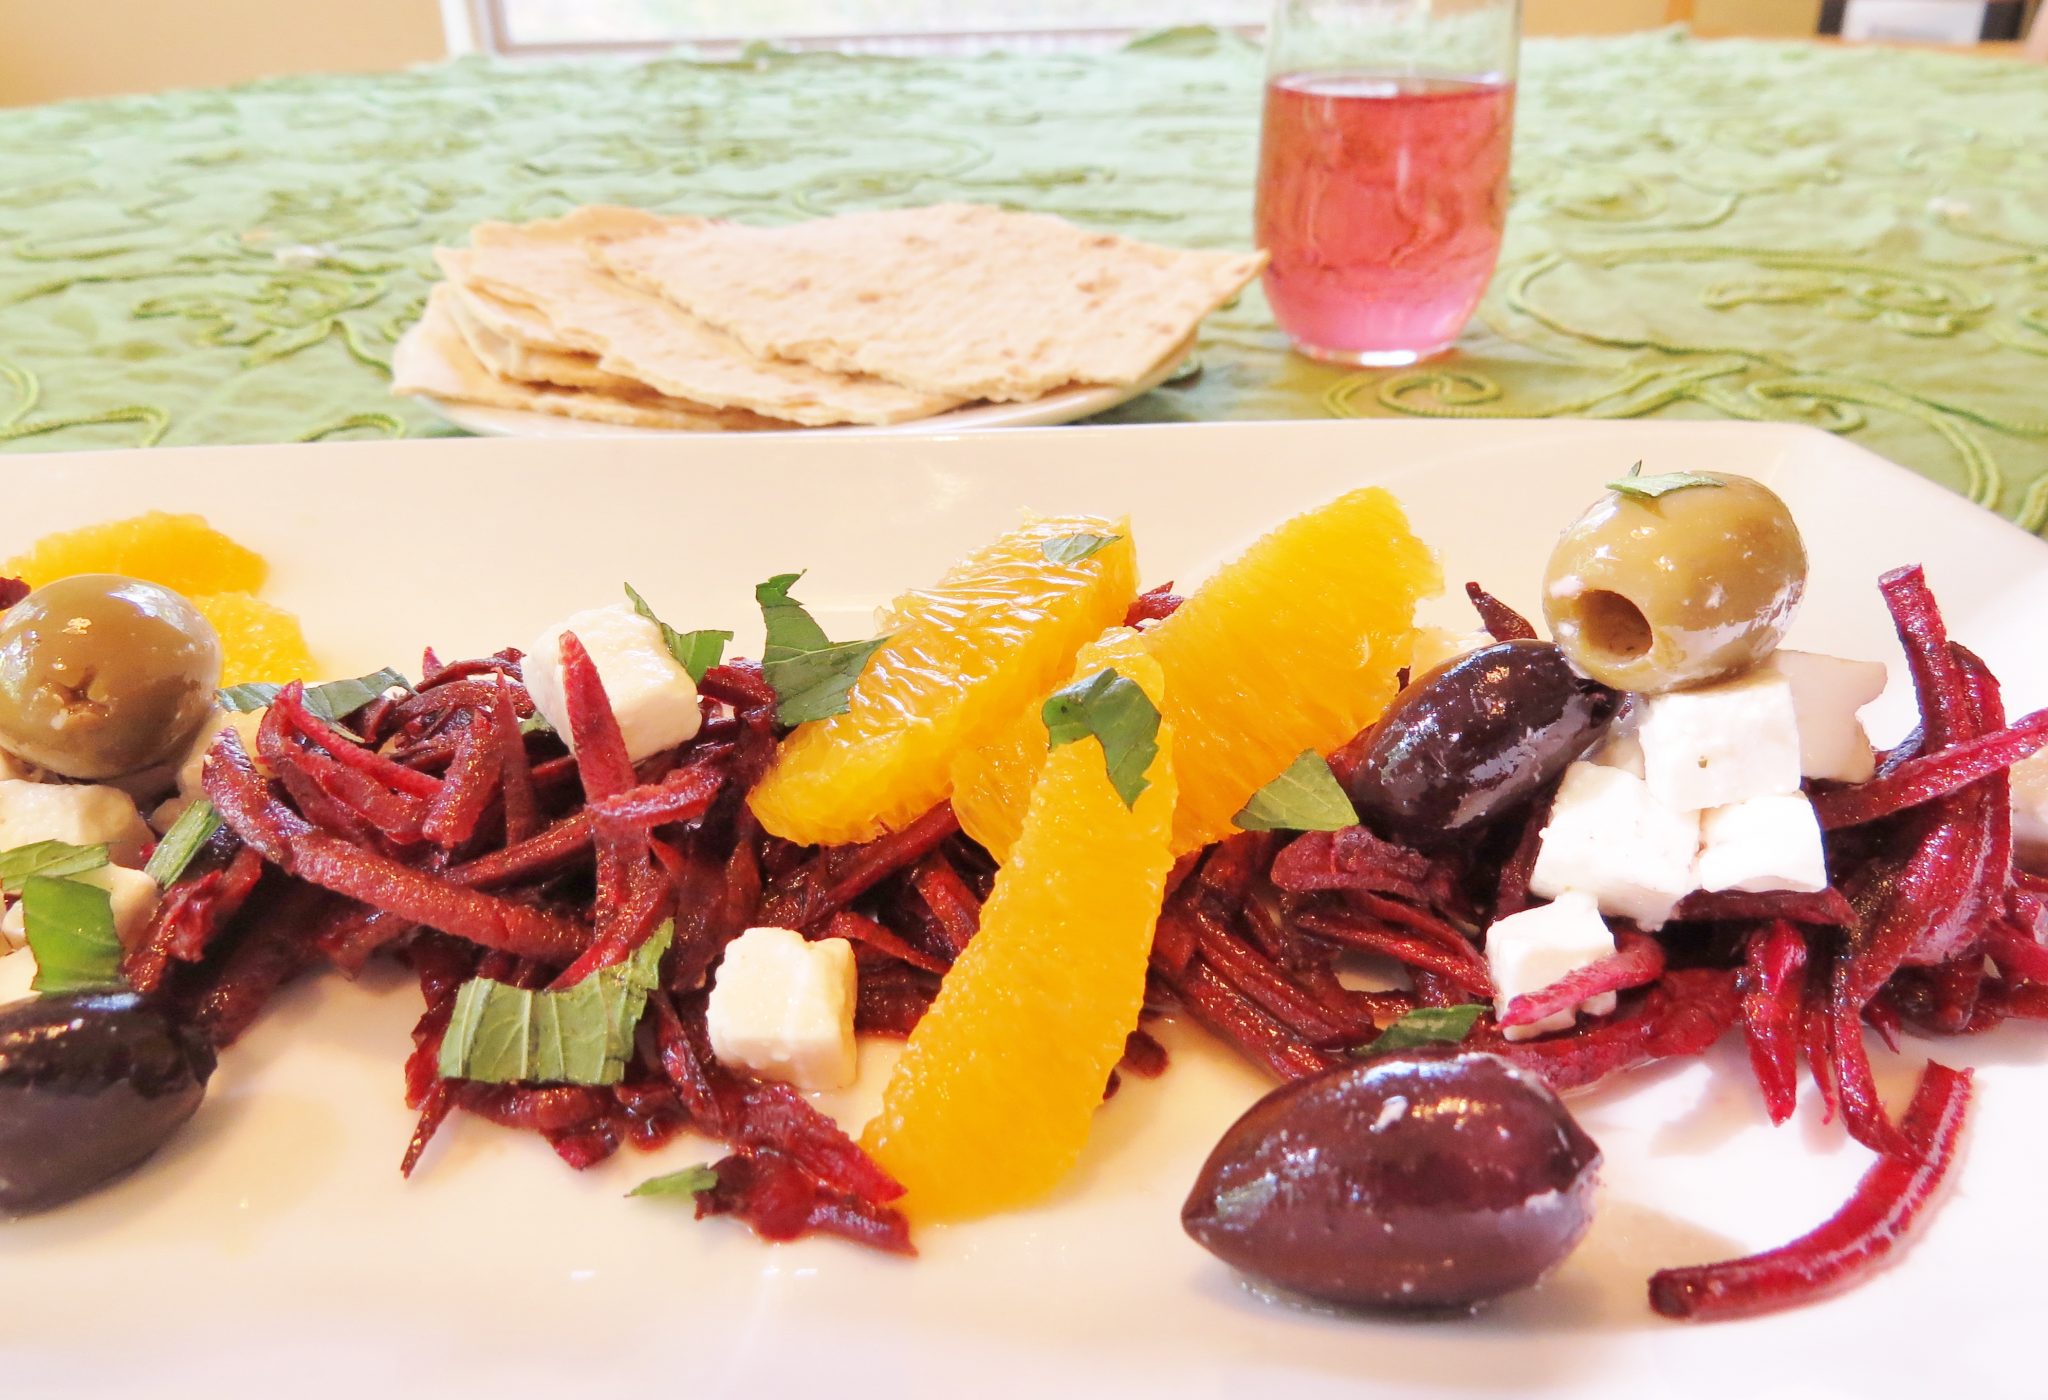 marinated beet salad with juicy fresh orange segments, cured olives and salty, crumbly feta cheese.